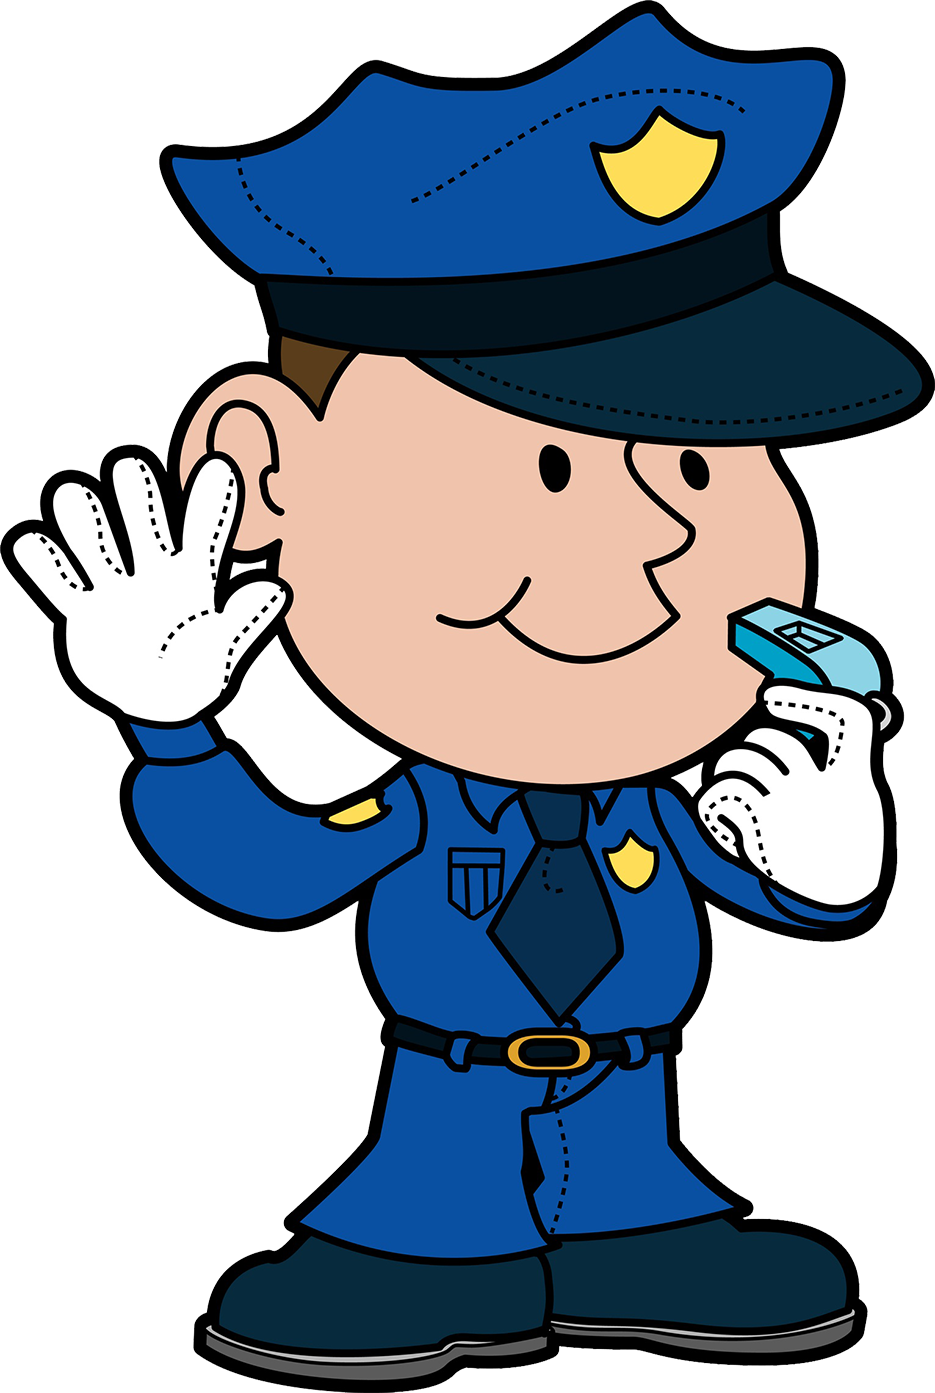 Police Officer with whistle